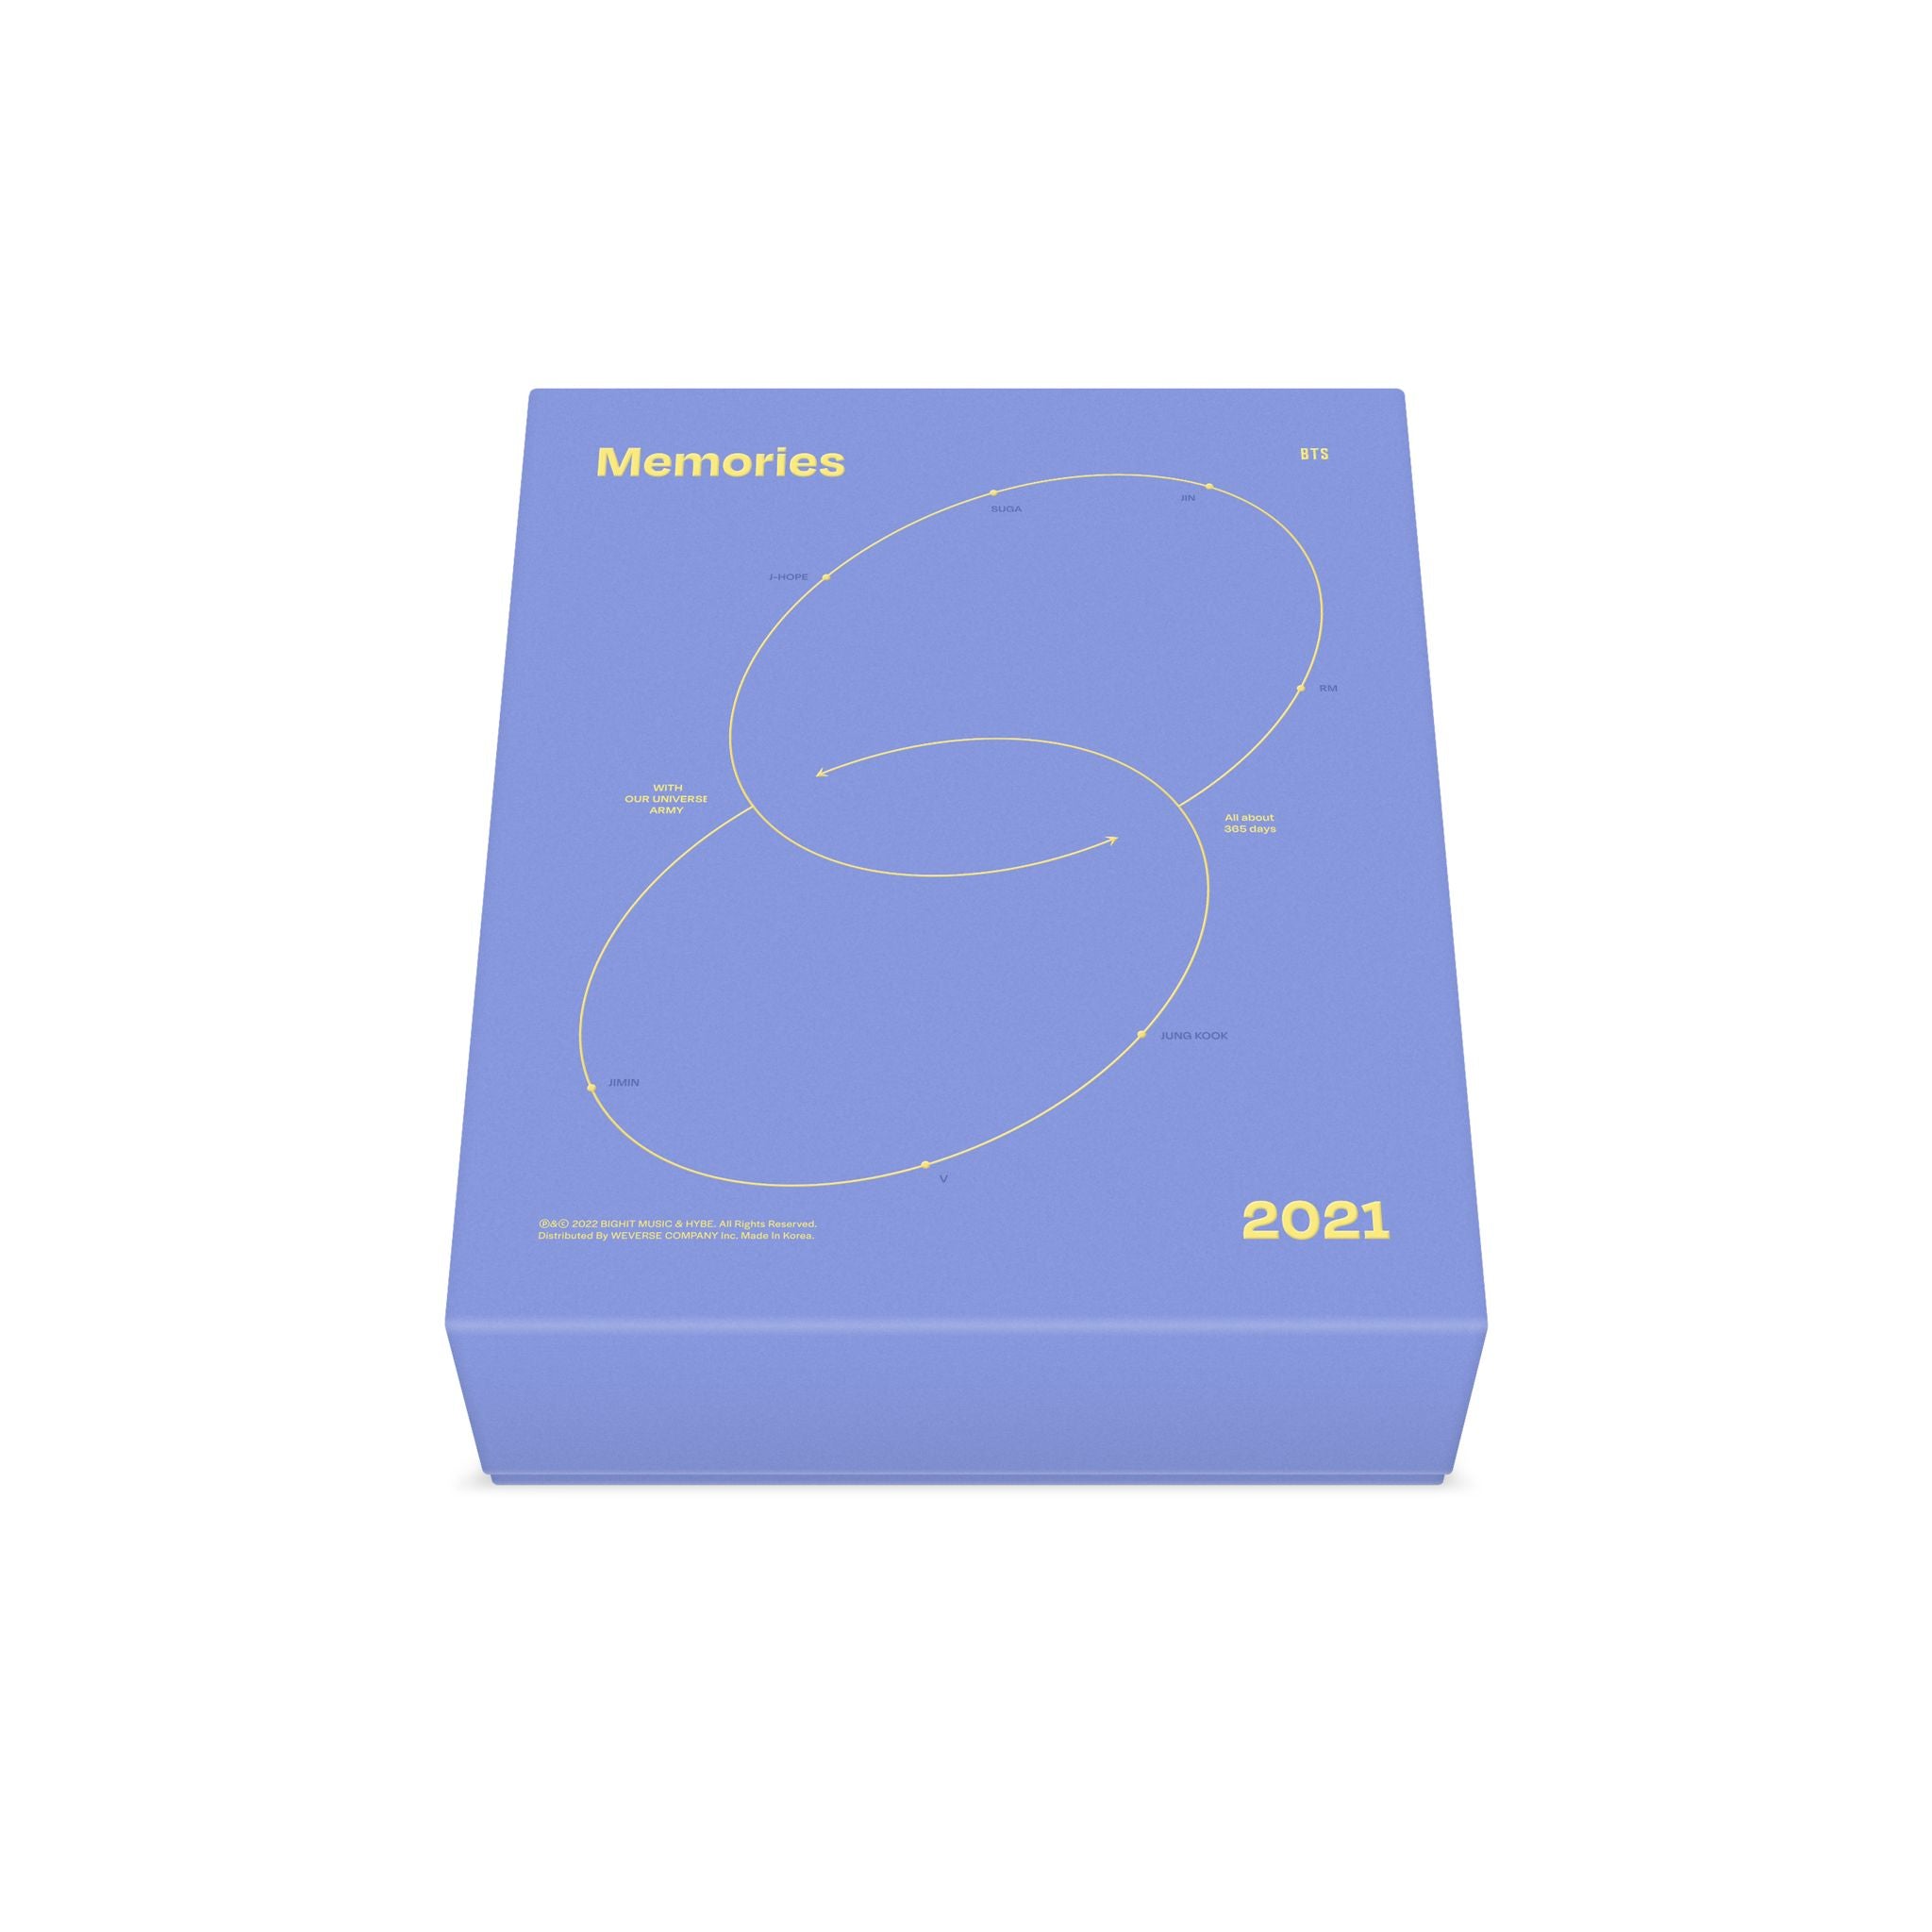 BTS - MEMORIES OF 2021 Blu-ray (Free Shipping Available)